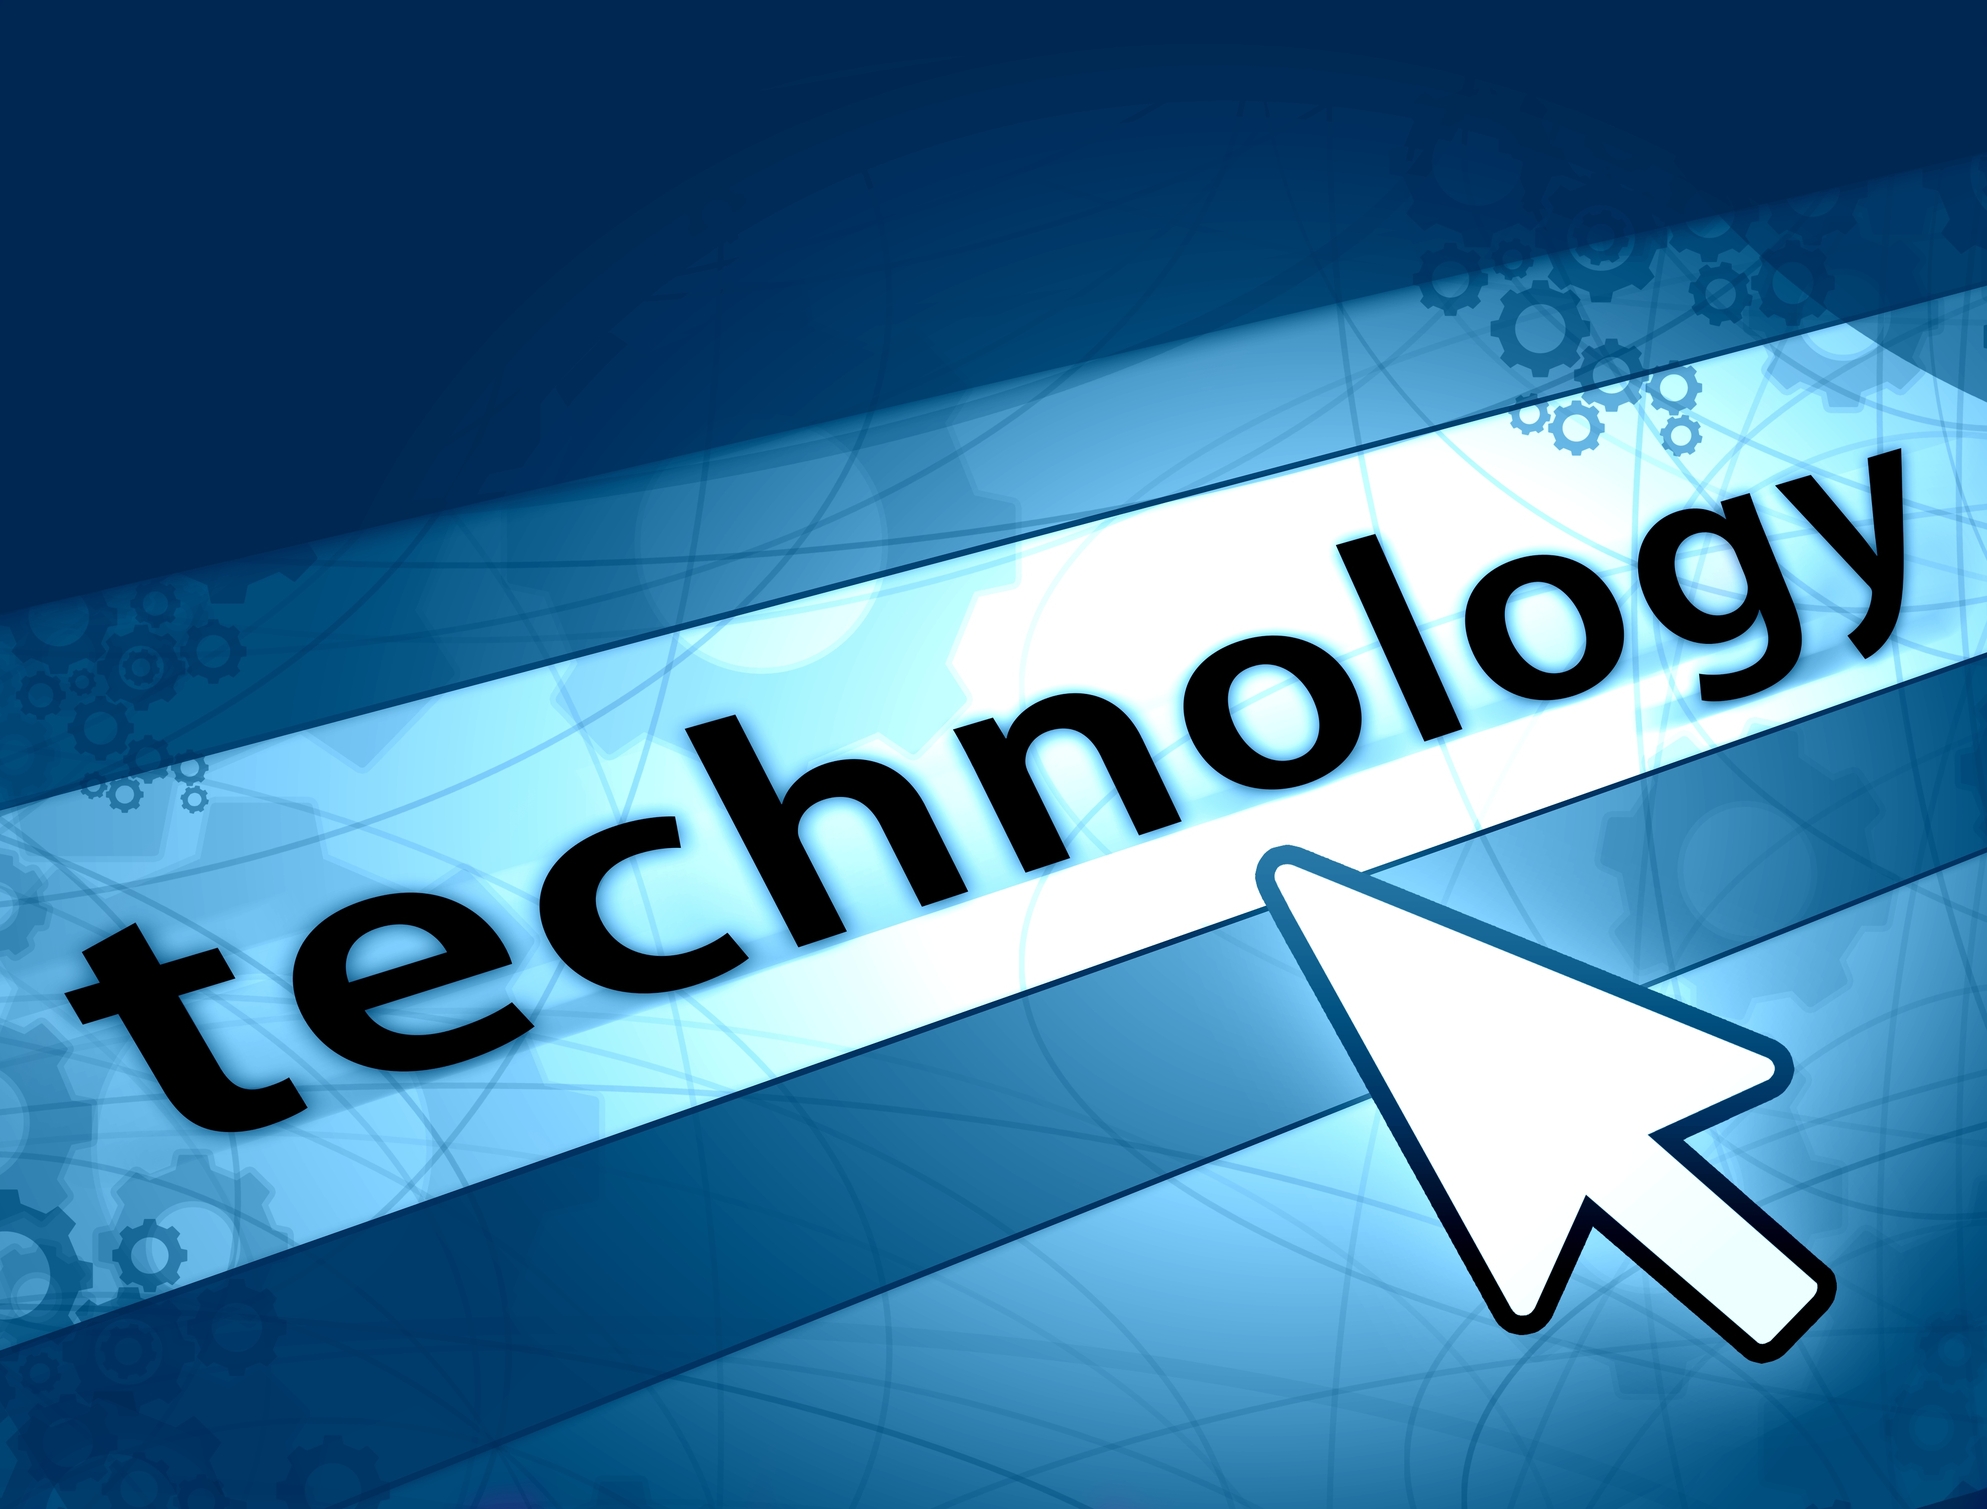 History of Technology Timeline - Britannica